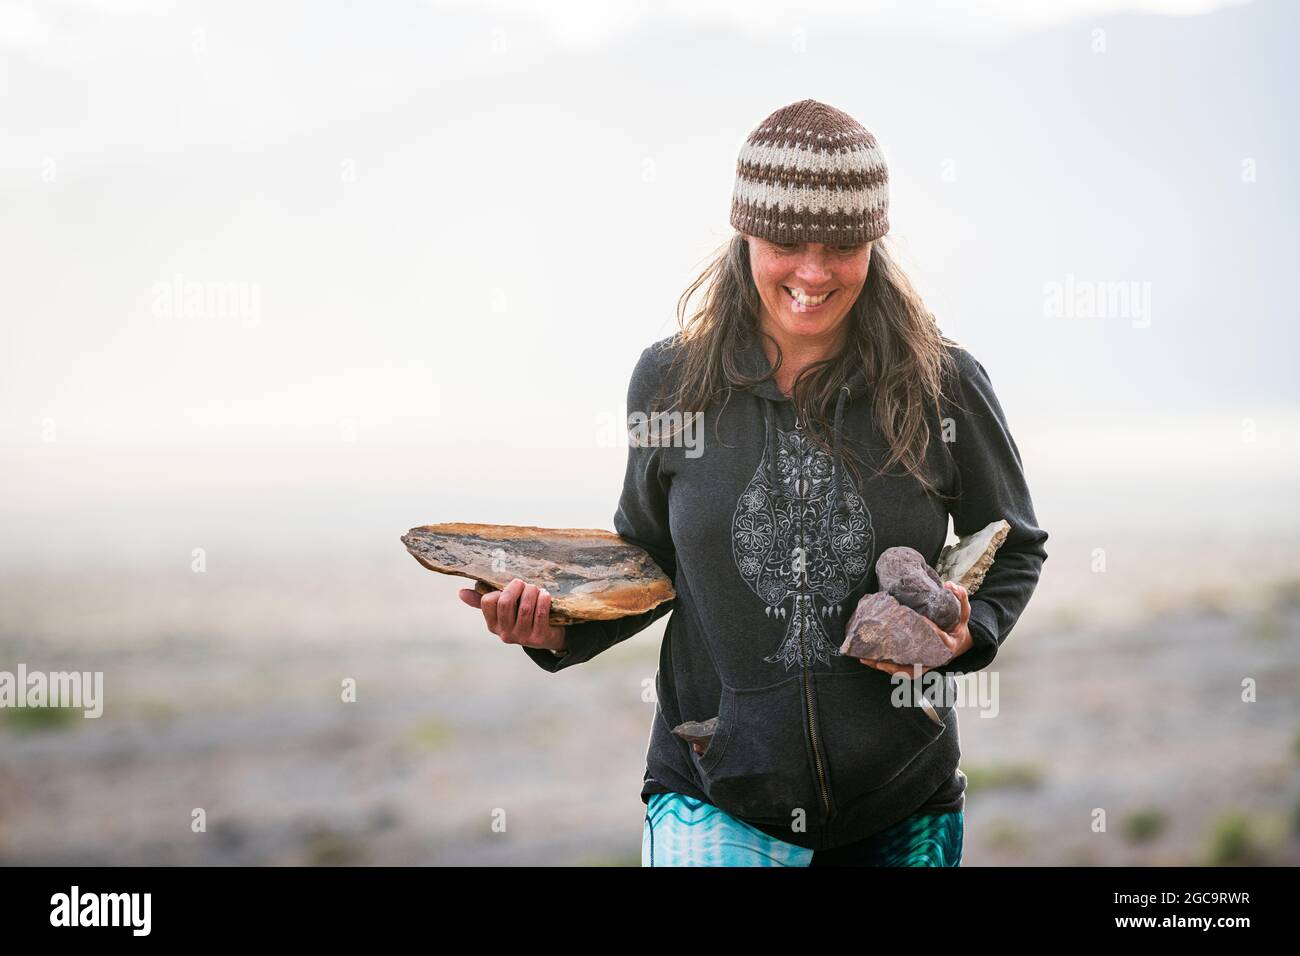 Woman collecting rocks on public land in the black rock desert with colorful leggings Stock Photo